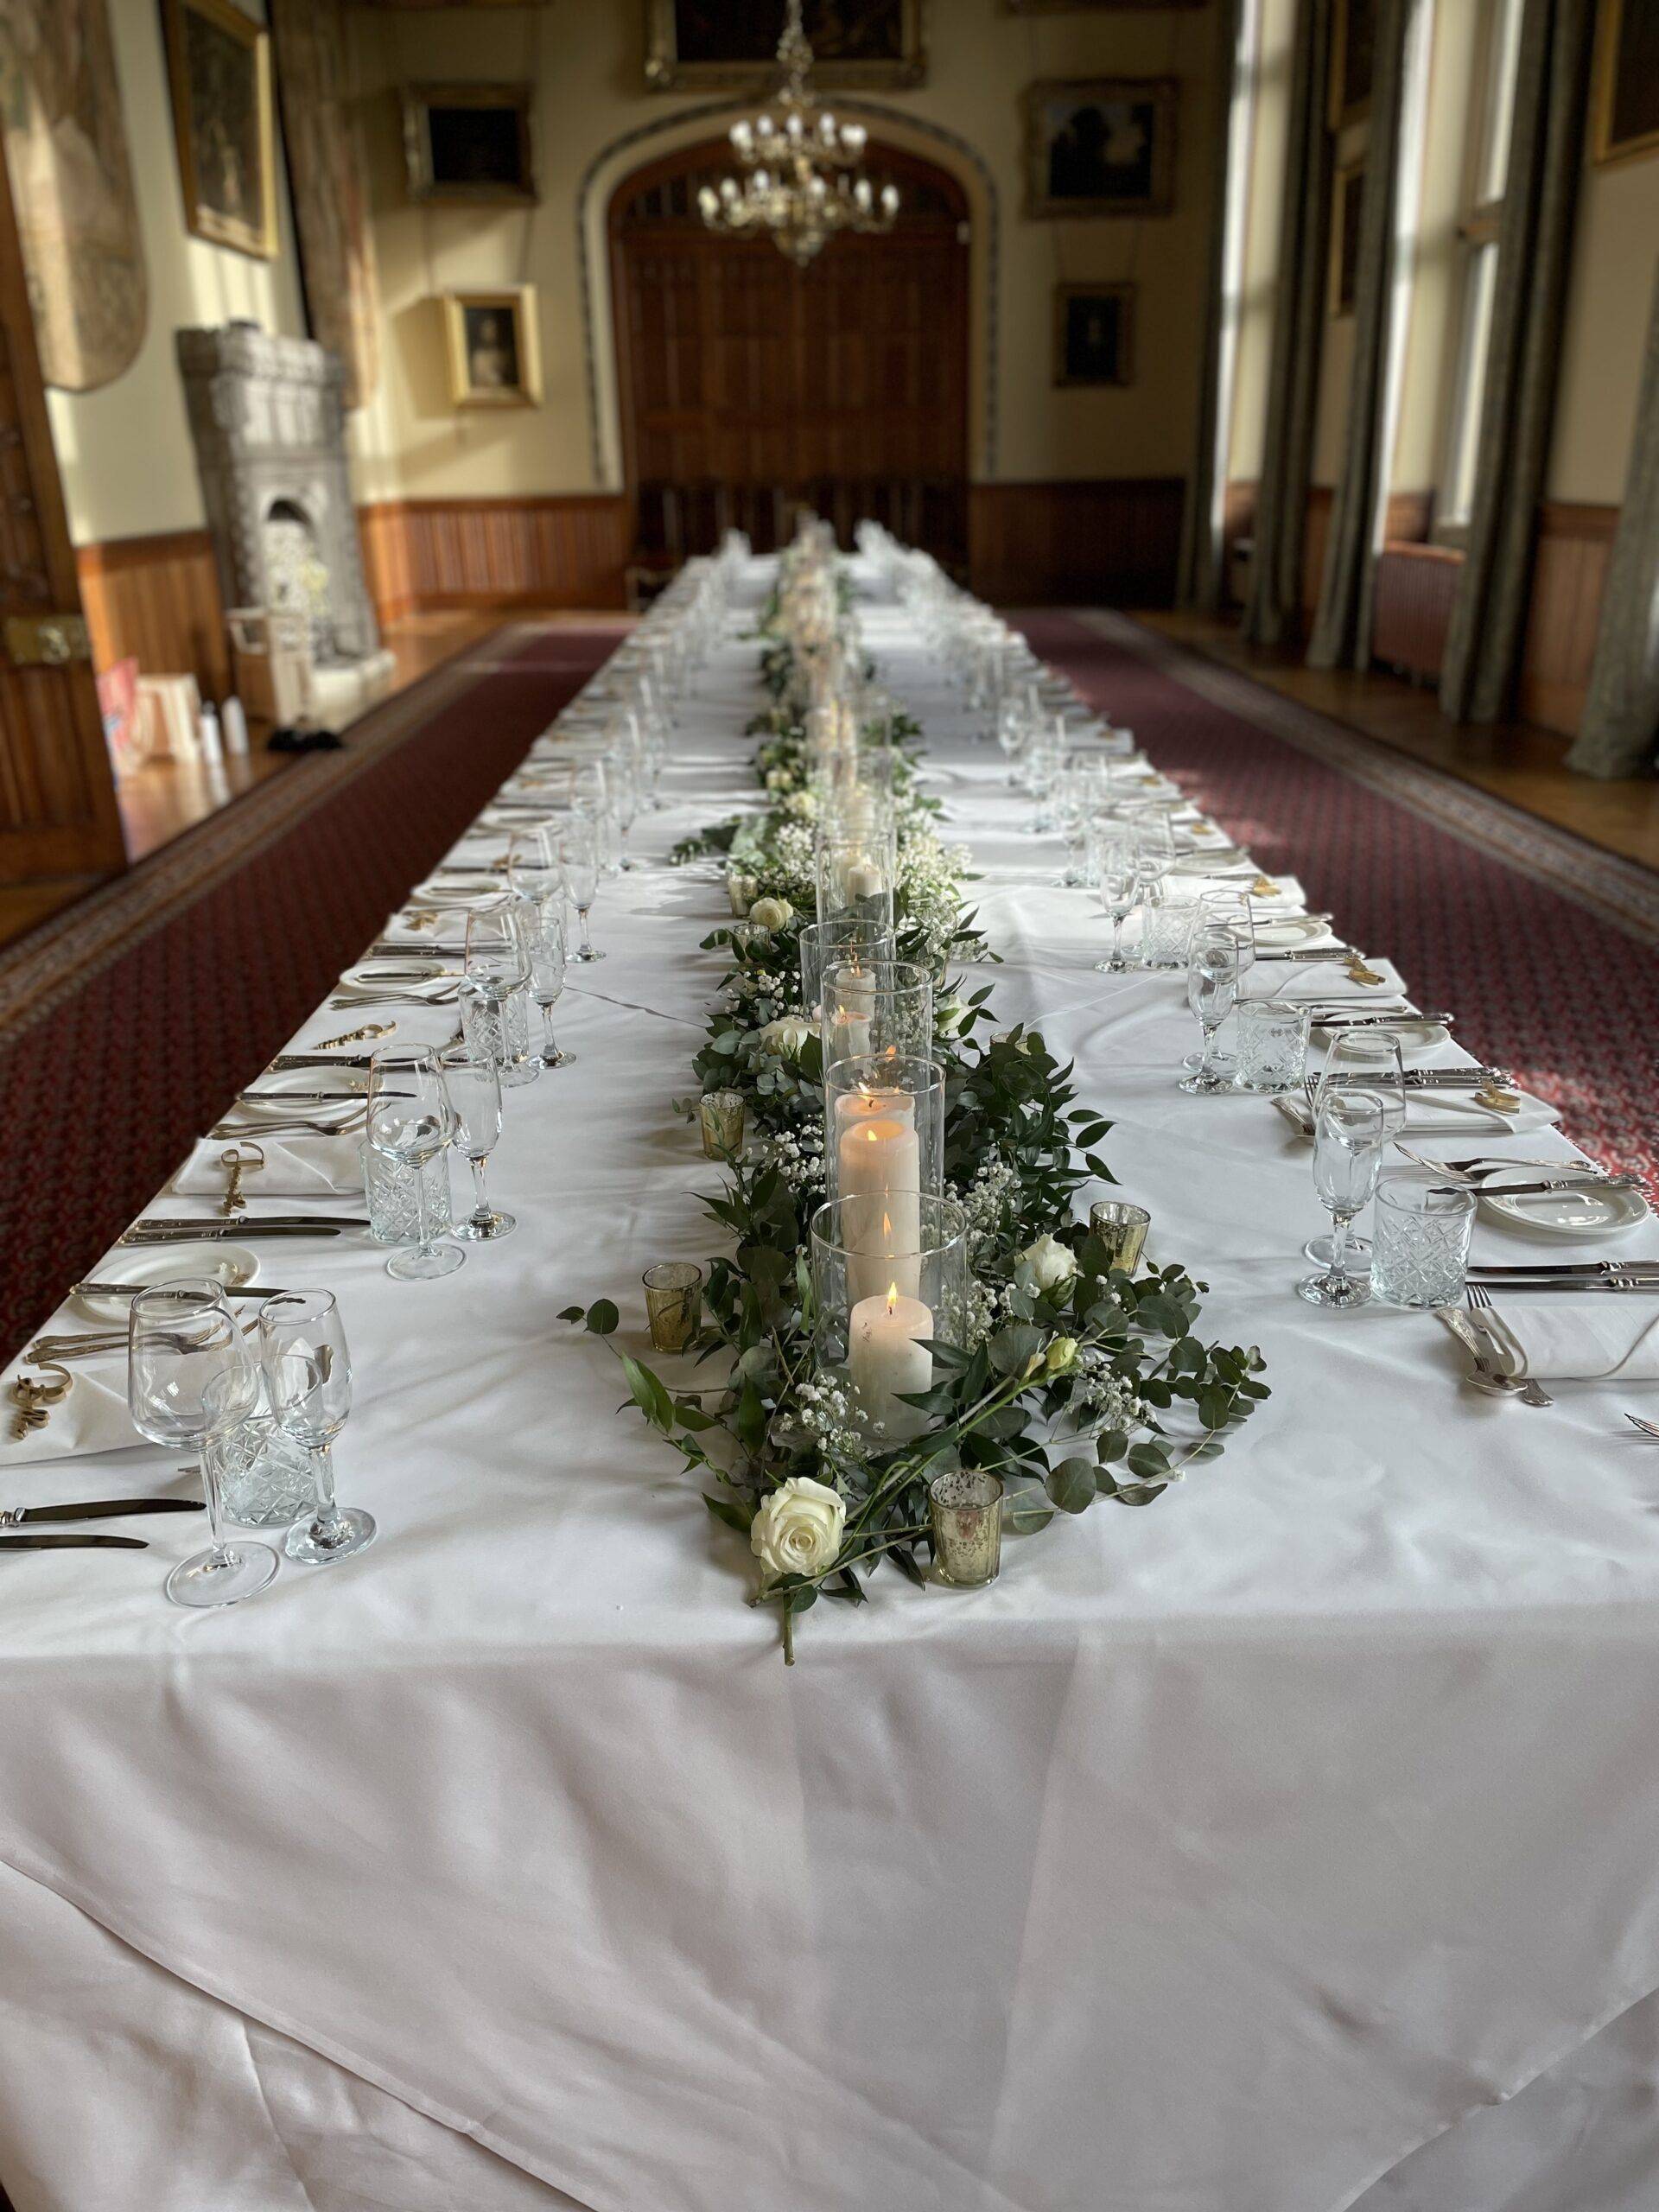 a long table with a candle and flowers on it.